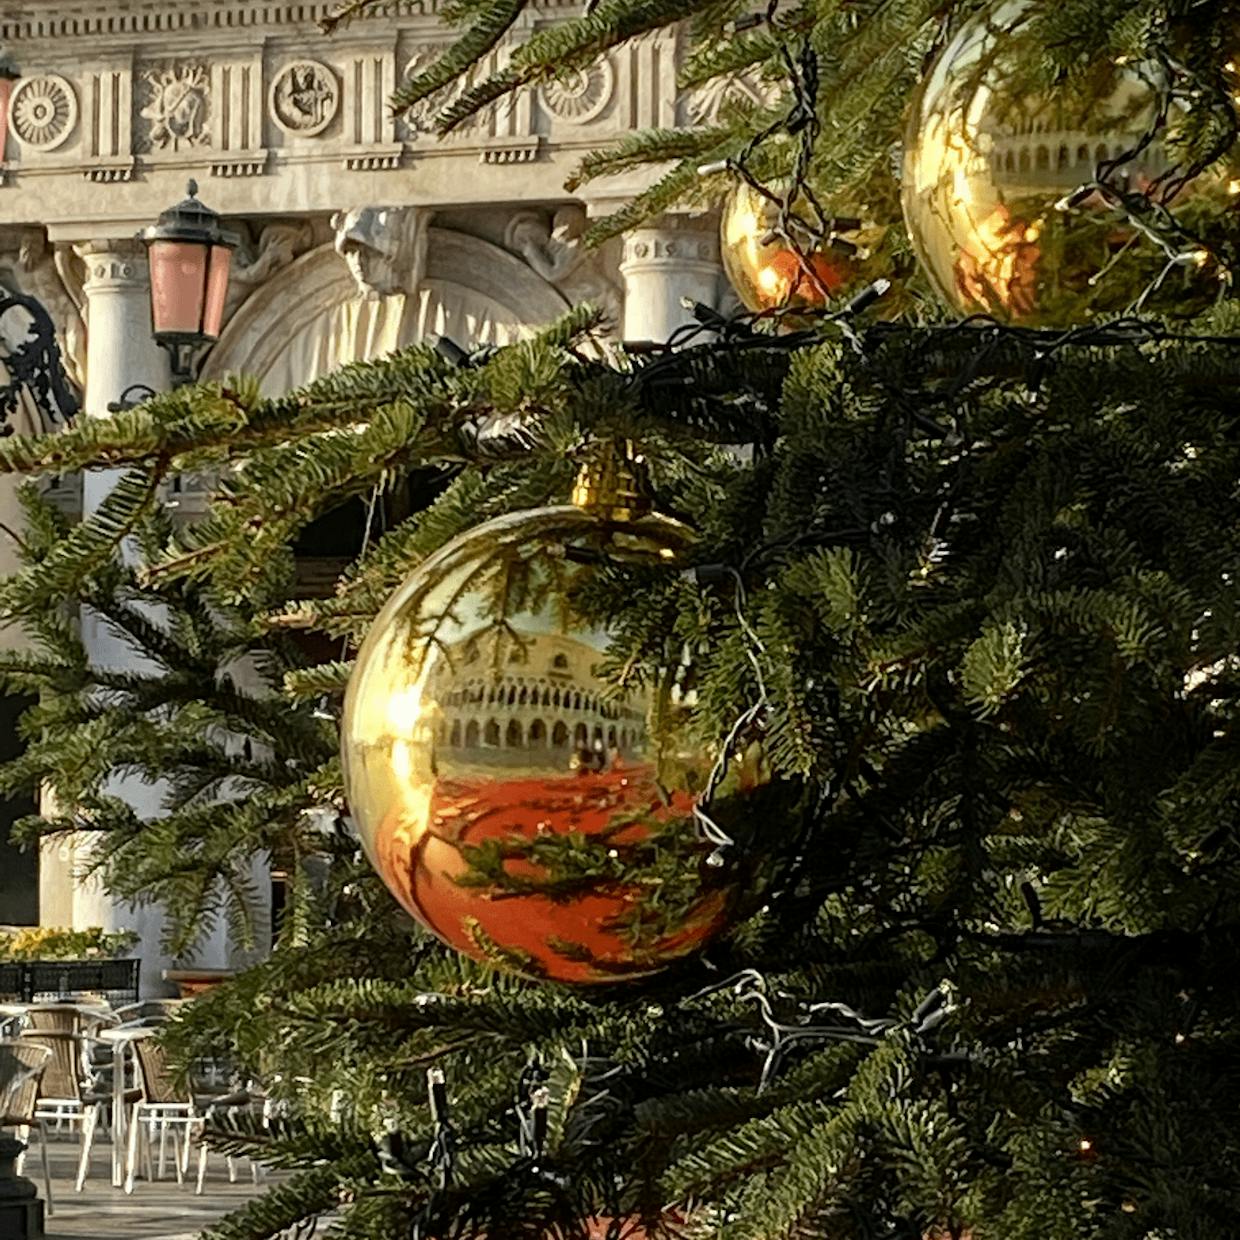 One more from Piazza San Marco in Venice in 2021...I love the reflection of the Doge's Palace in the tree ornament!